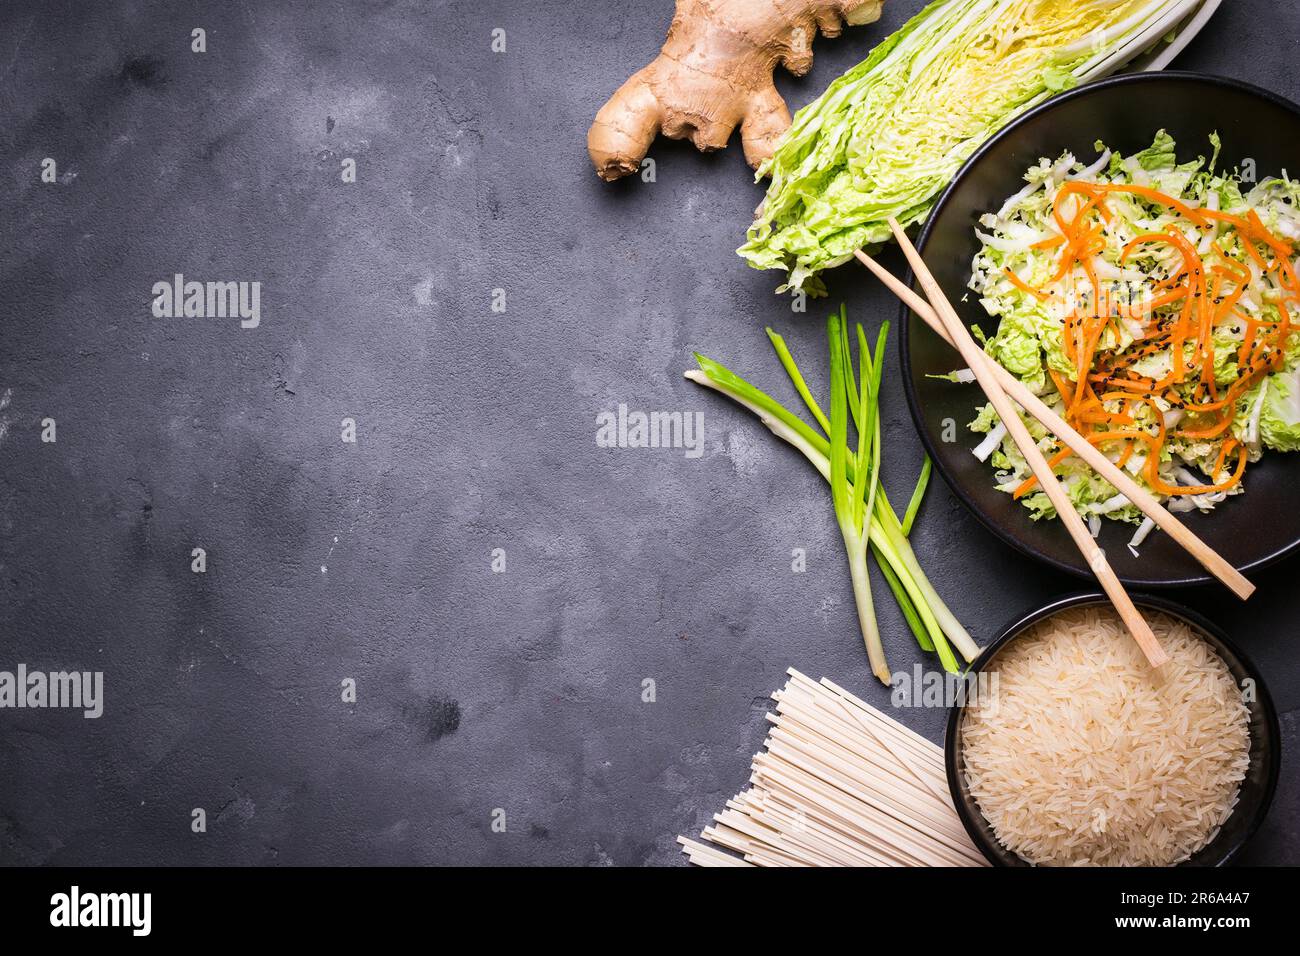 Ingredients for making chinese dinner: wheat noodles, rice, napa cabbage, ginger, green onion. Asian cooking ingredients. Top view. Preparing healthy Stock Photo